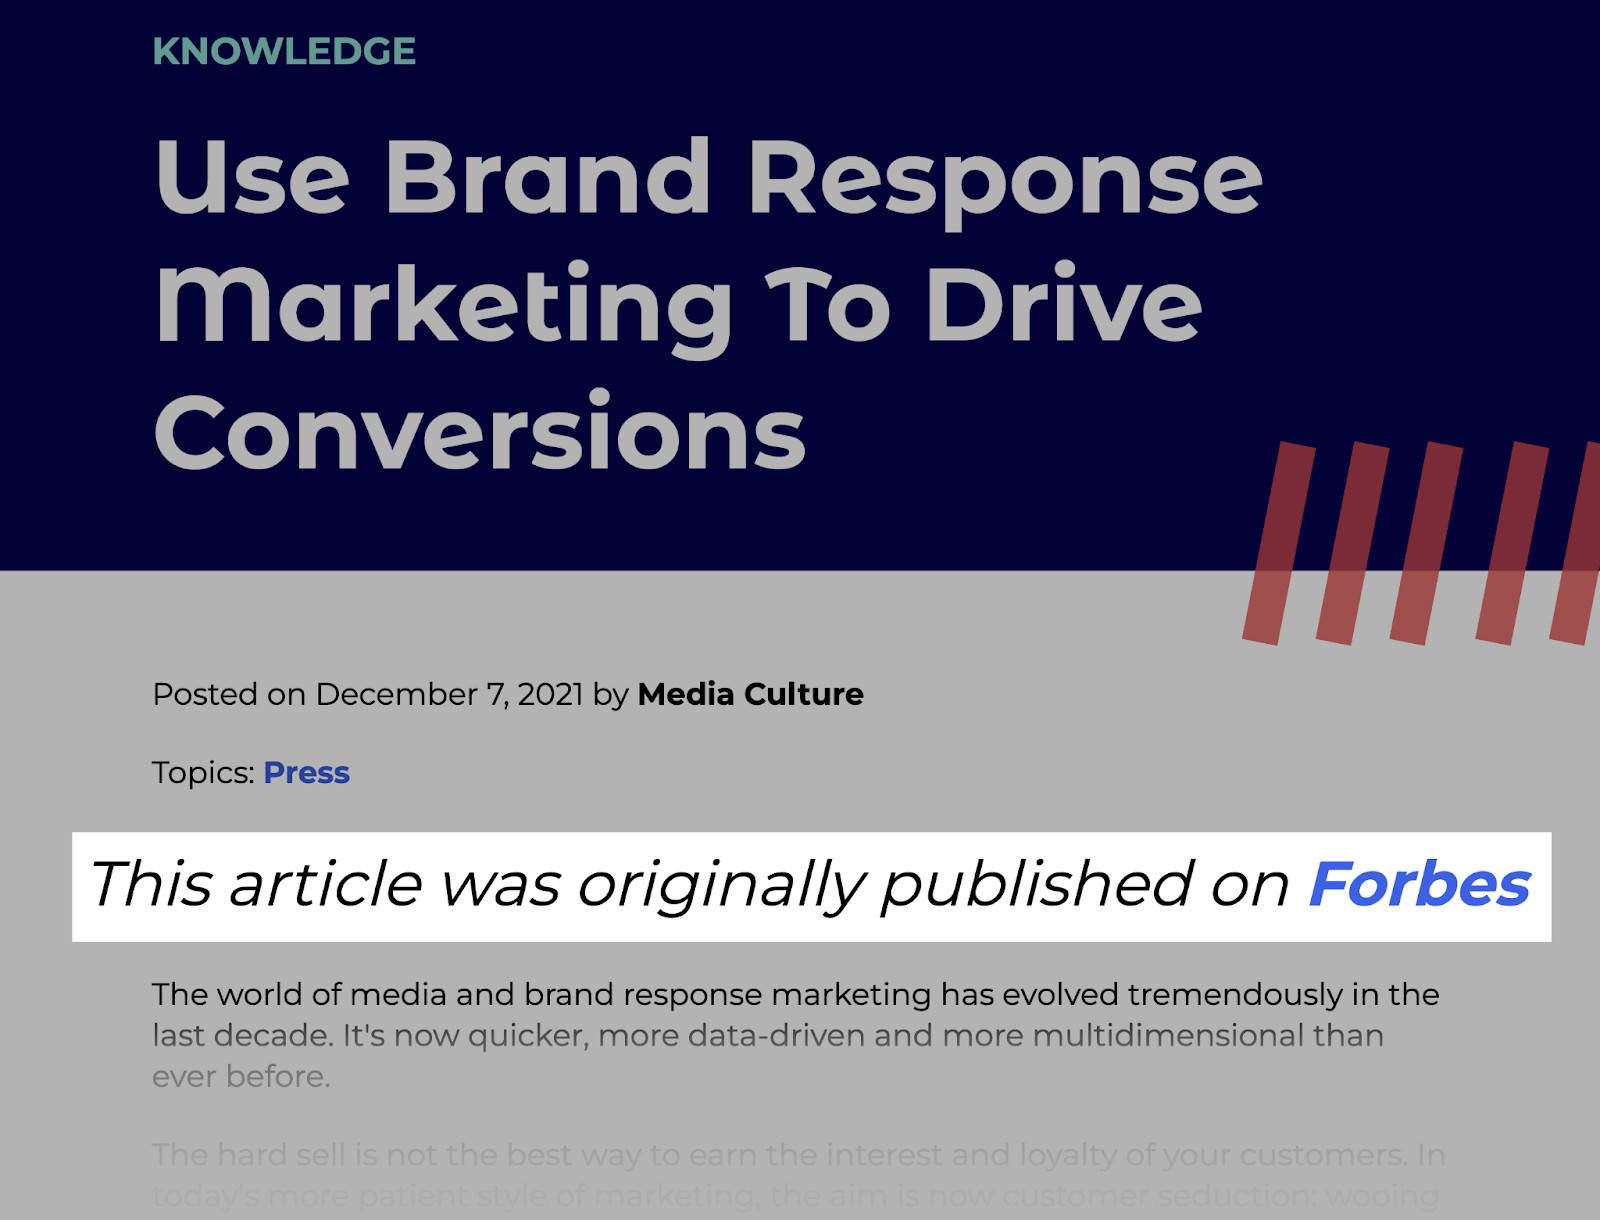 "This article was originally published on Forbes" note in an article published on Knowledge